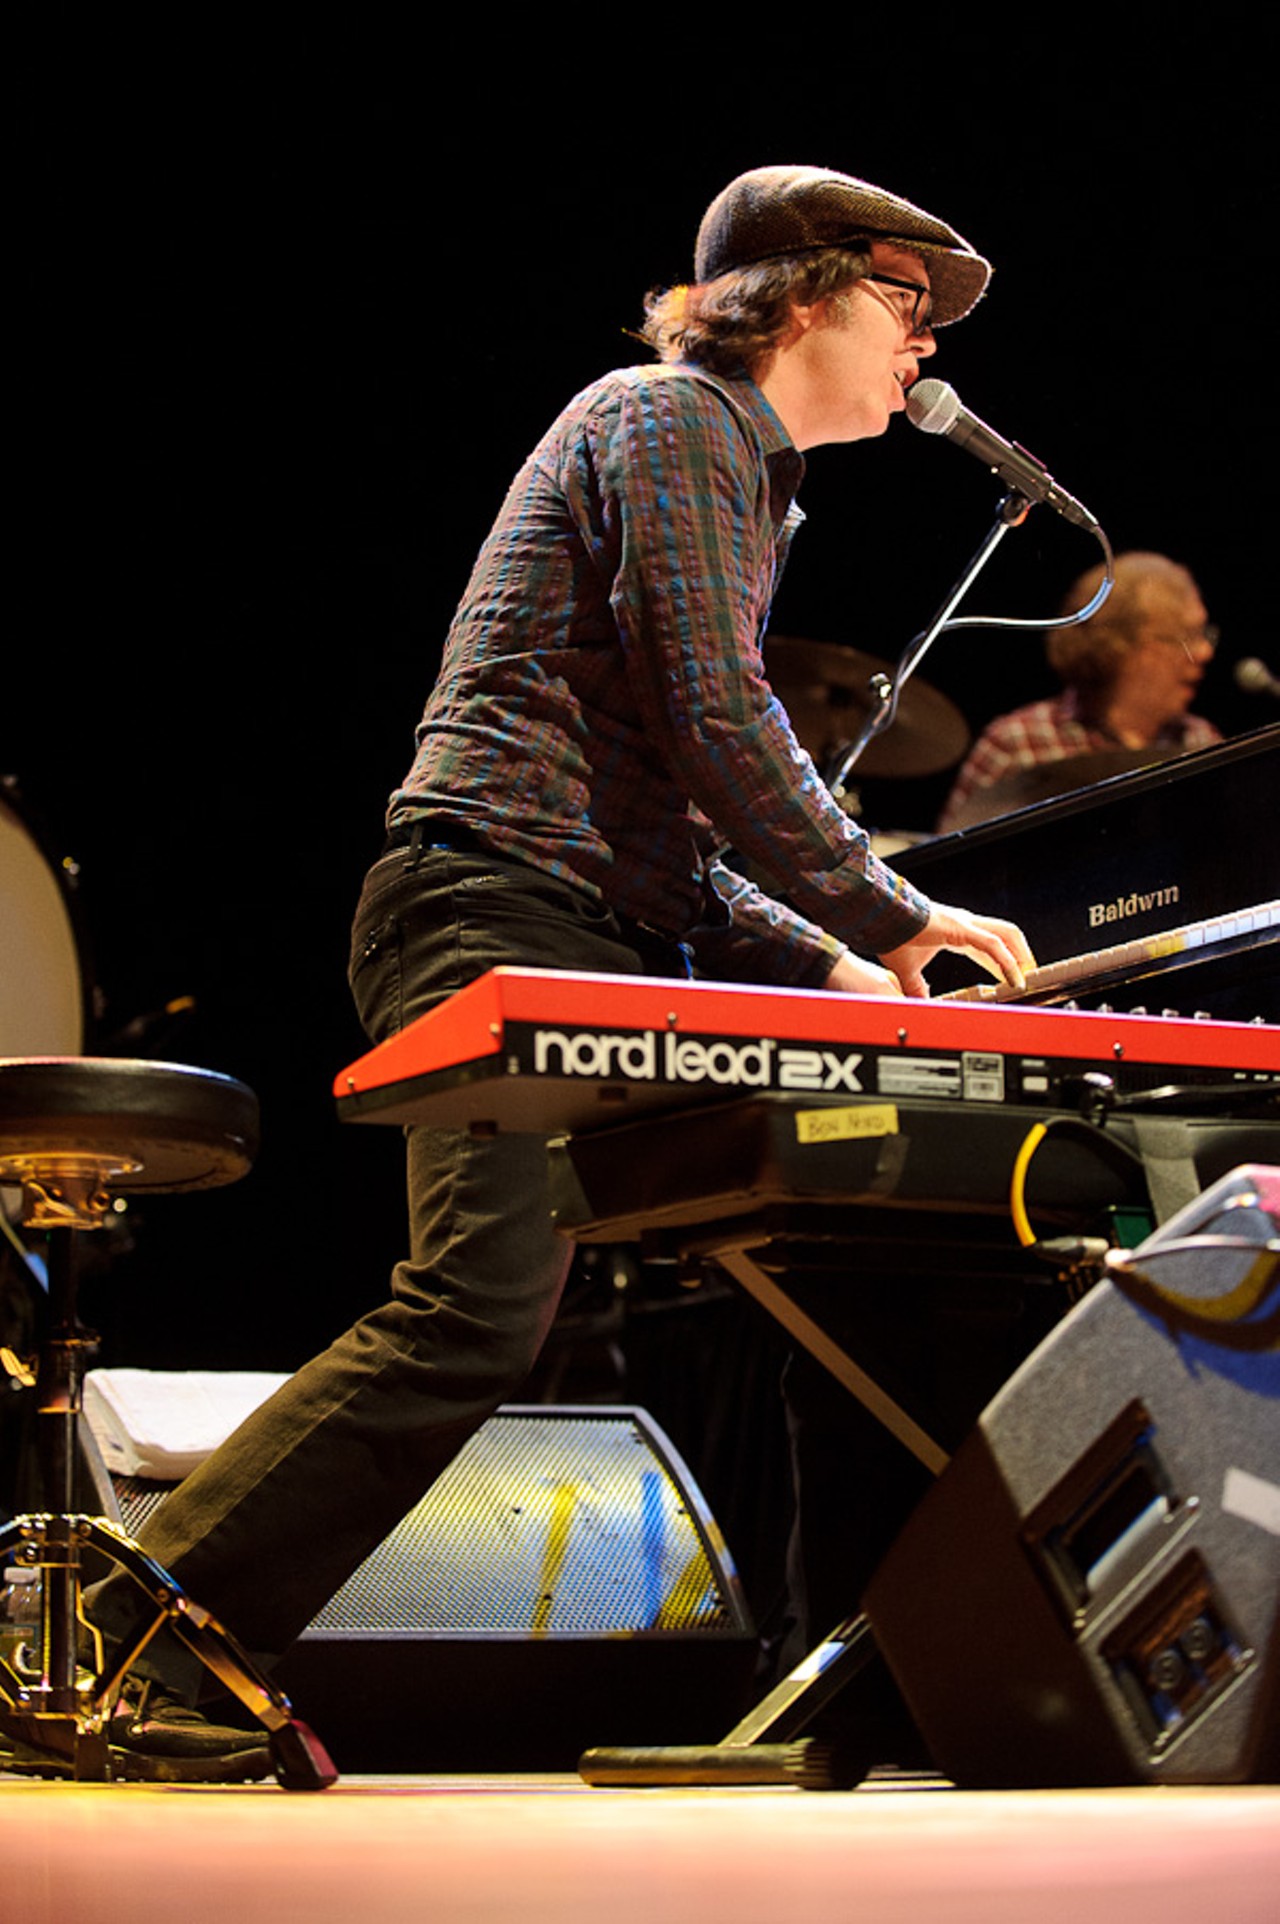 Ben Folds performing at the Pageant.